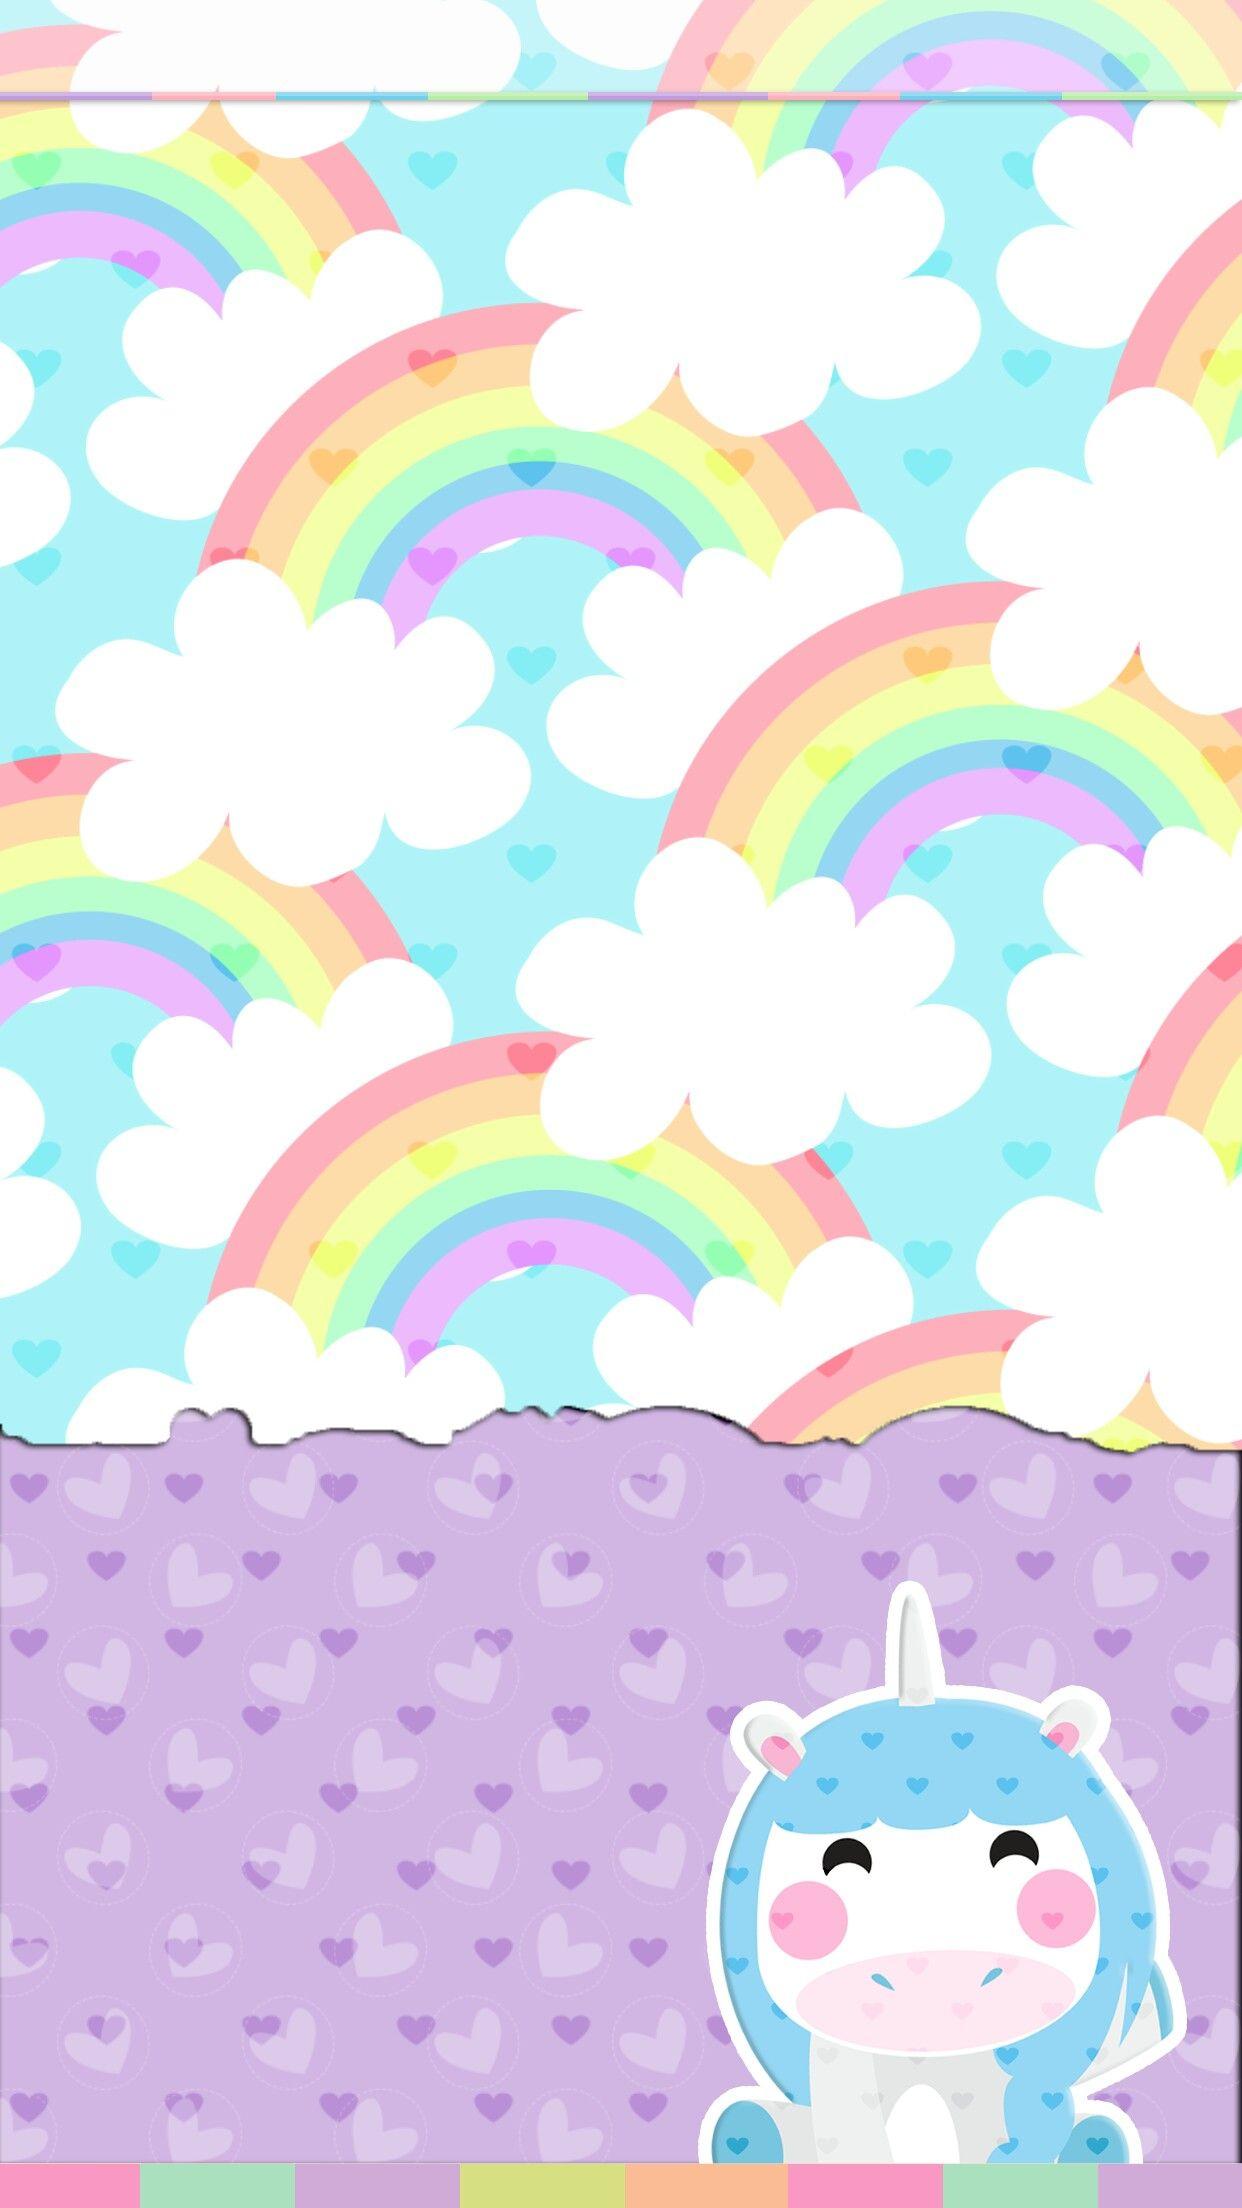 Share more than 56 rainbow wallpaper for phone best - in.cdgdbentre